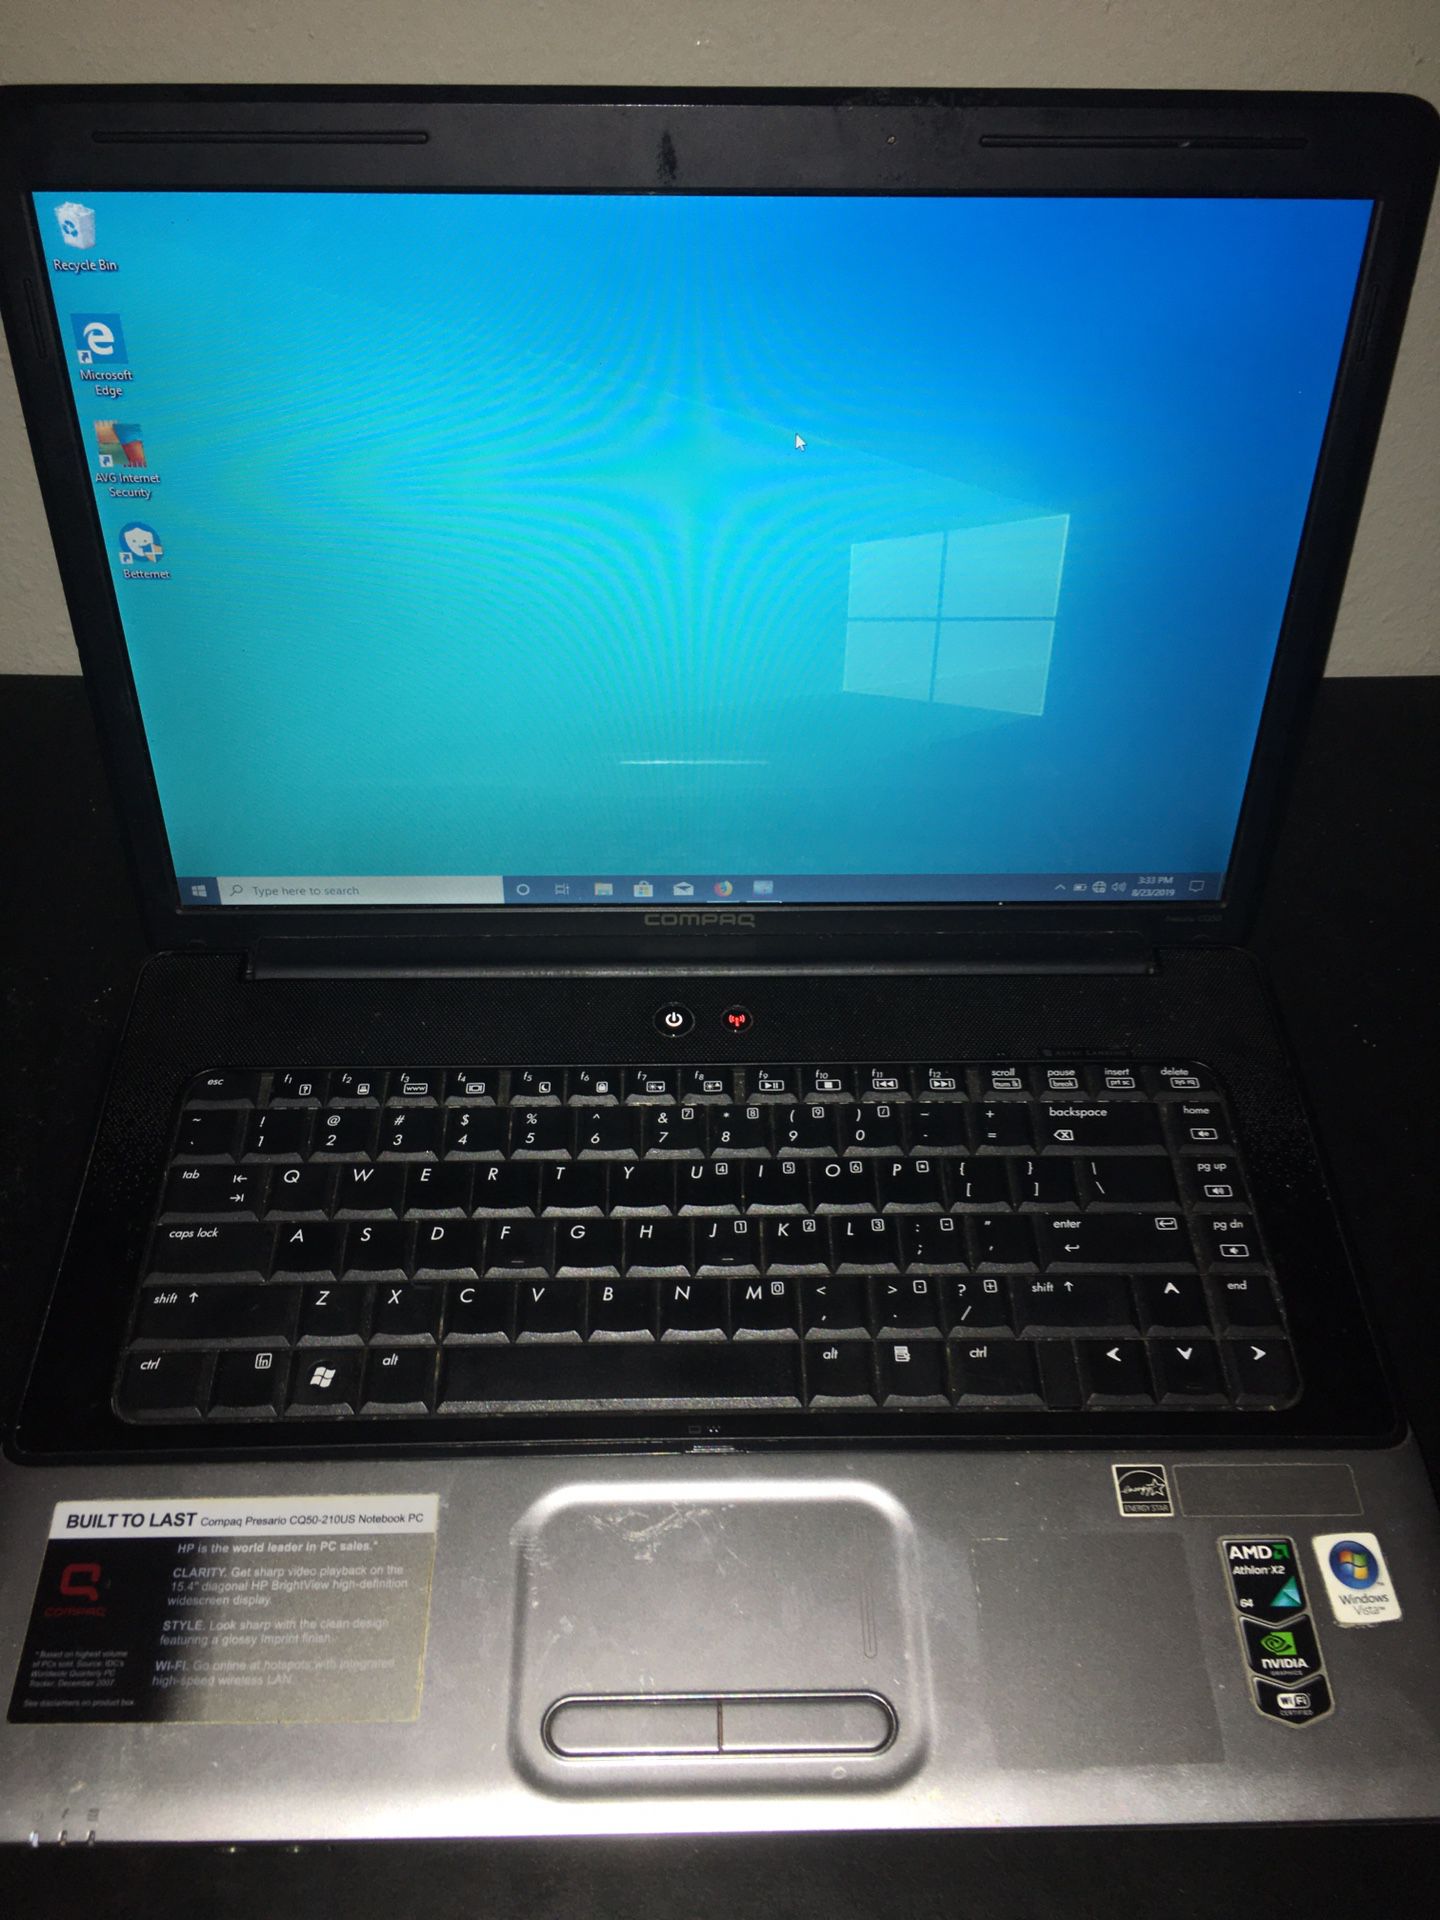 Compaq CQ50 Laptop (Fresh Install Windows 10 Pro)(No Virus or 3rd party apps preinstalled)